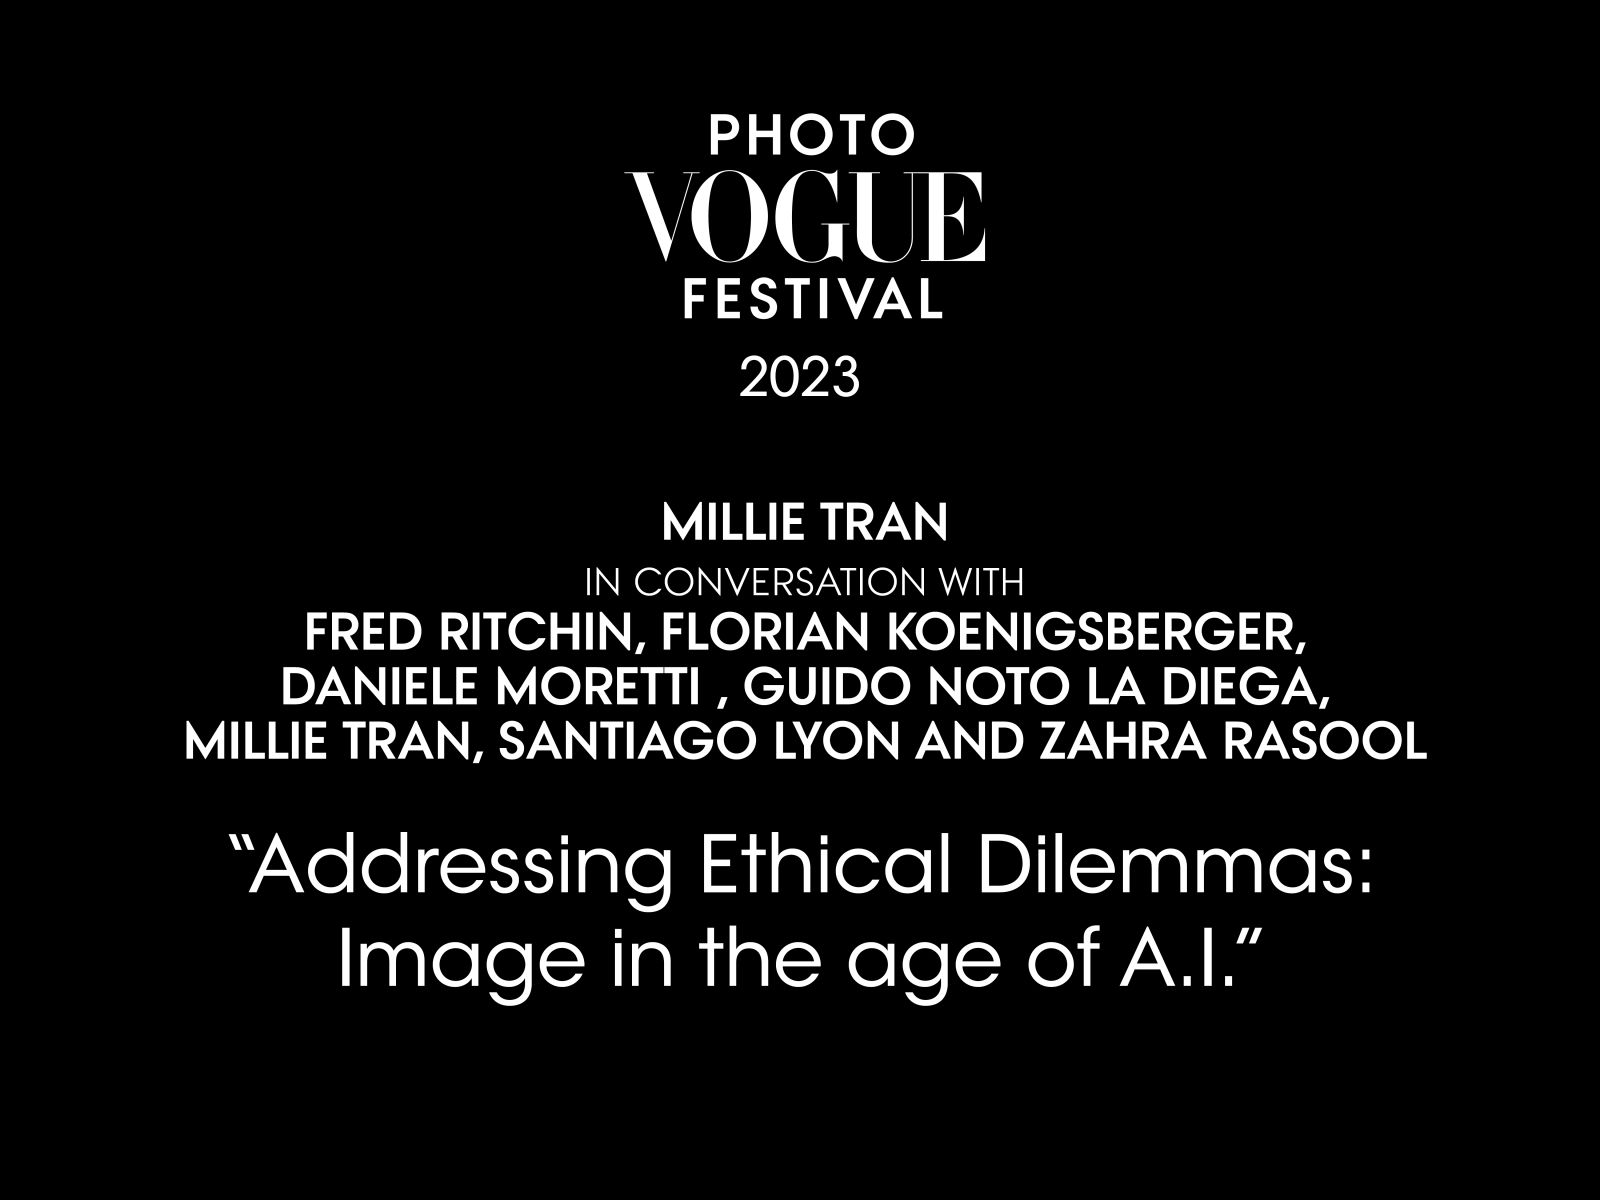 Addressing Ethical Dilemmas: Image in the age of A.I. | PhotoVogue Festival 2023: What Makes Us Human? Image in the Age of A.I.